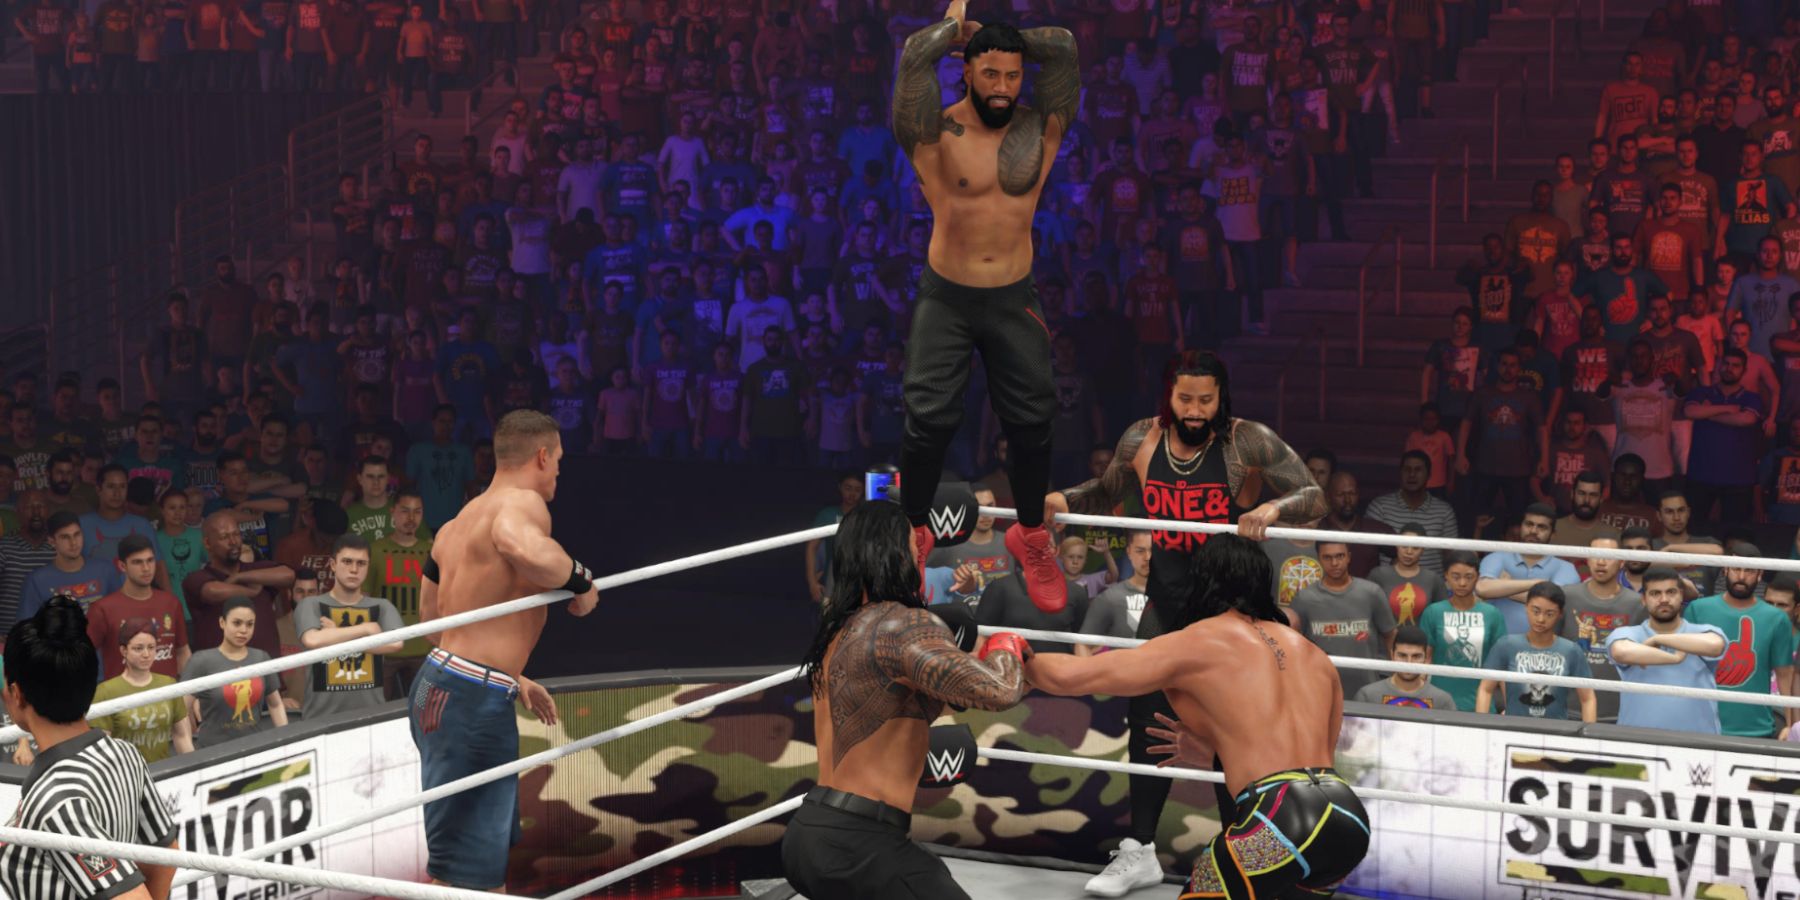 WWE 2K23 Survivor Series match double team from Jay Uso and Roman